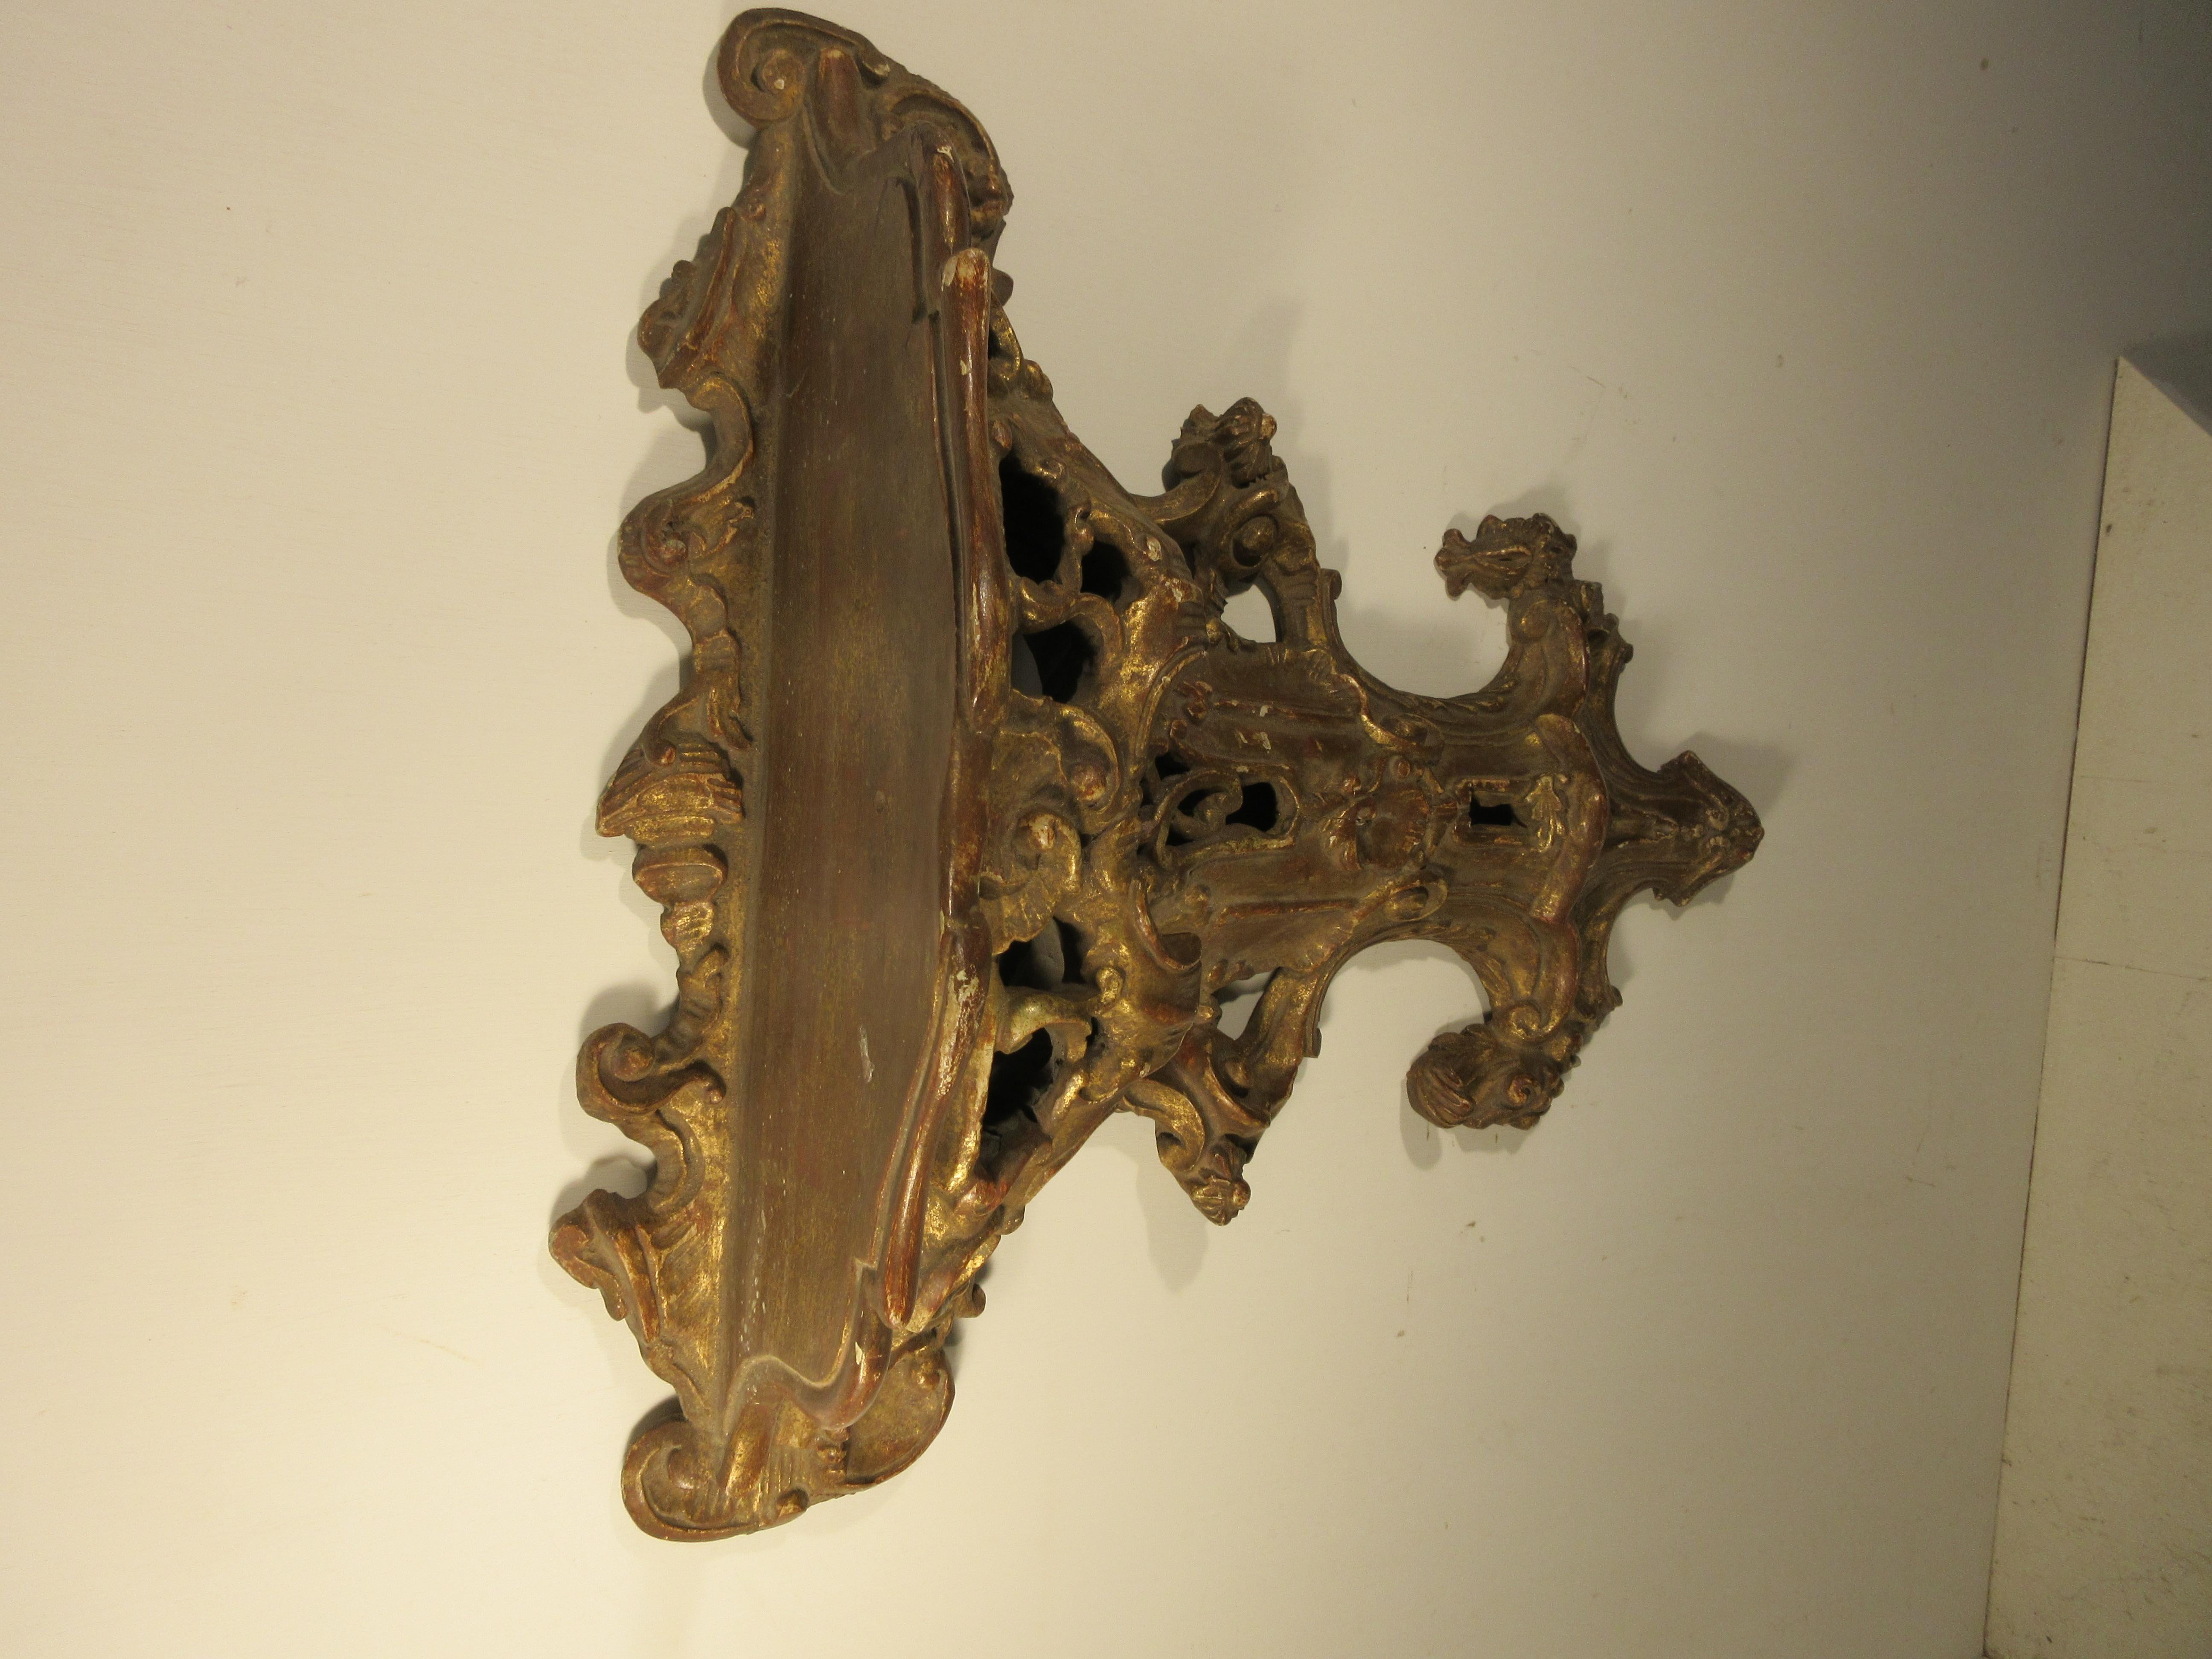 19th century Italian gilded shelf hand carved in wood. Wonderful detail and good patina found on this beautiful .Rococo style wall shelf.